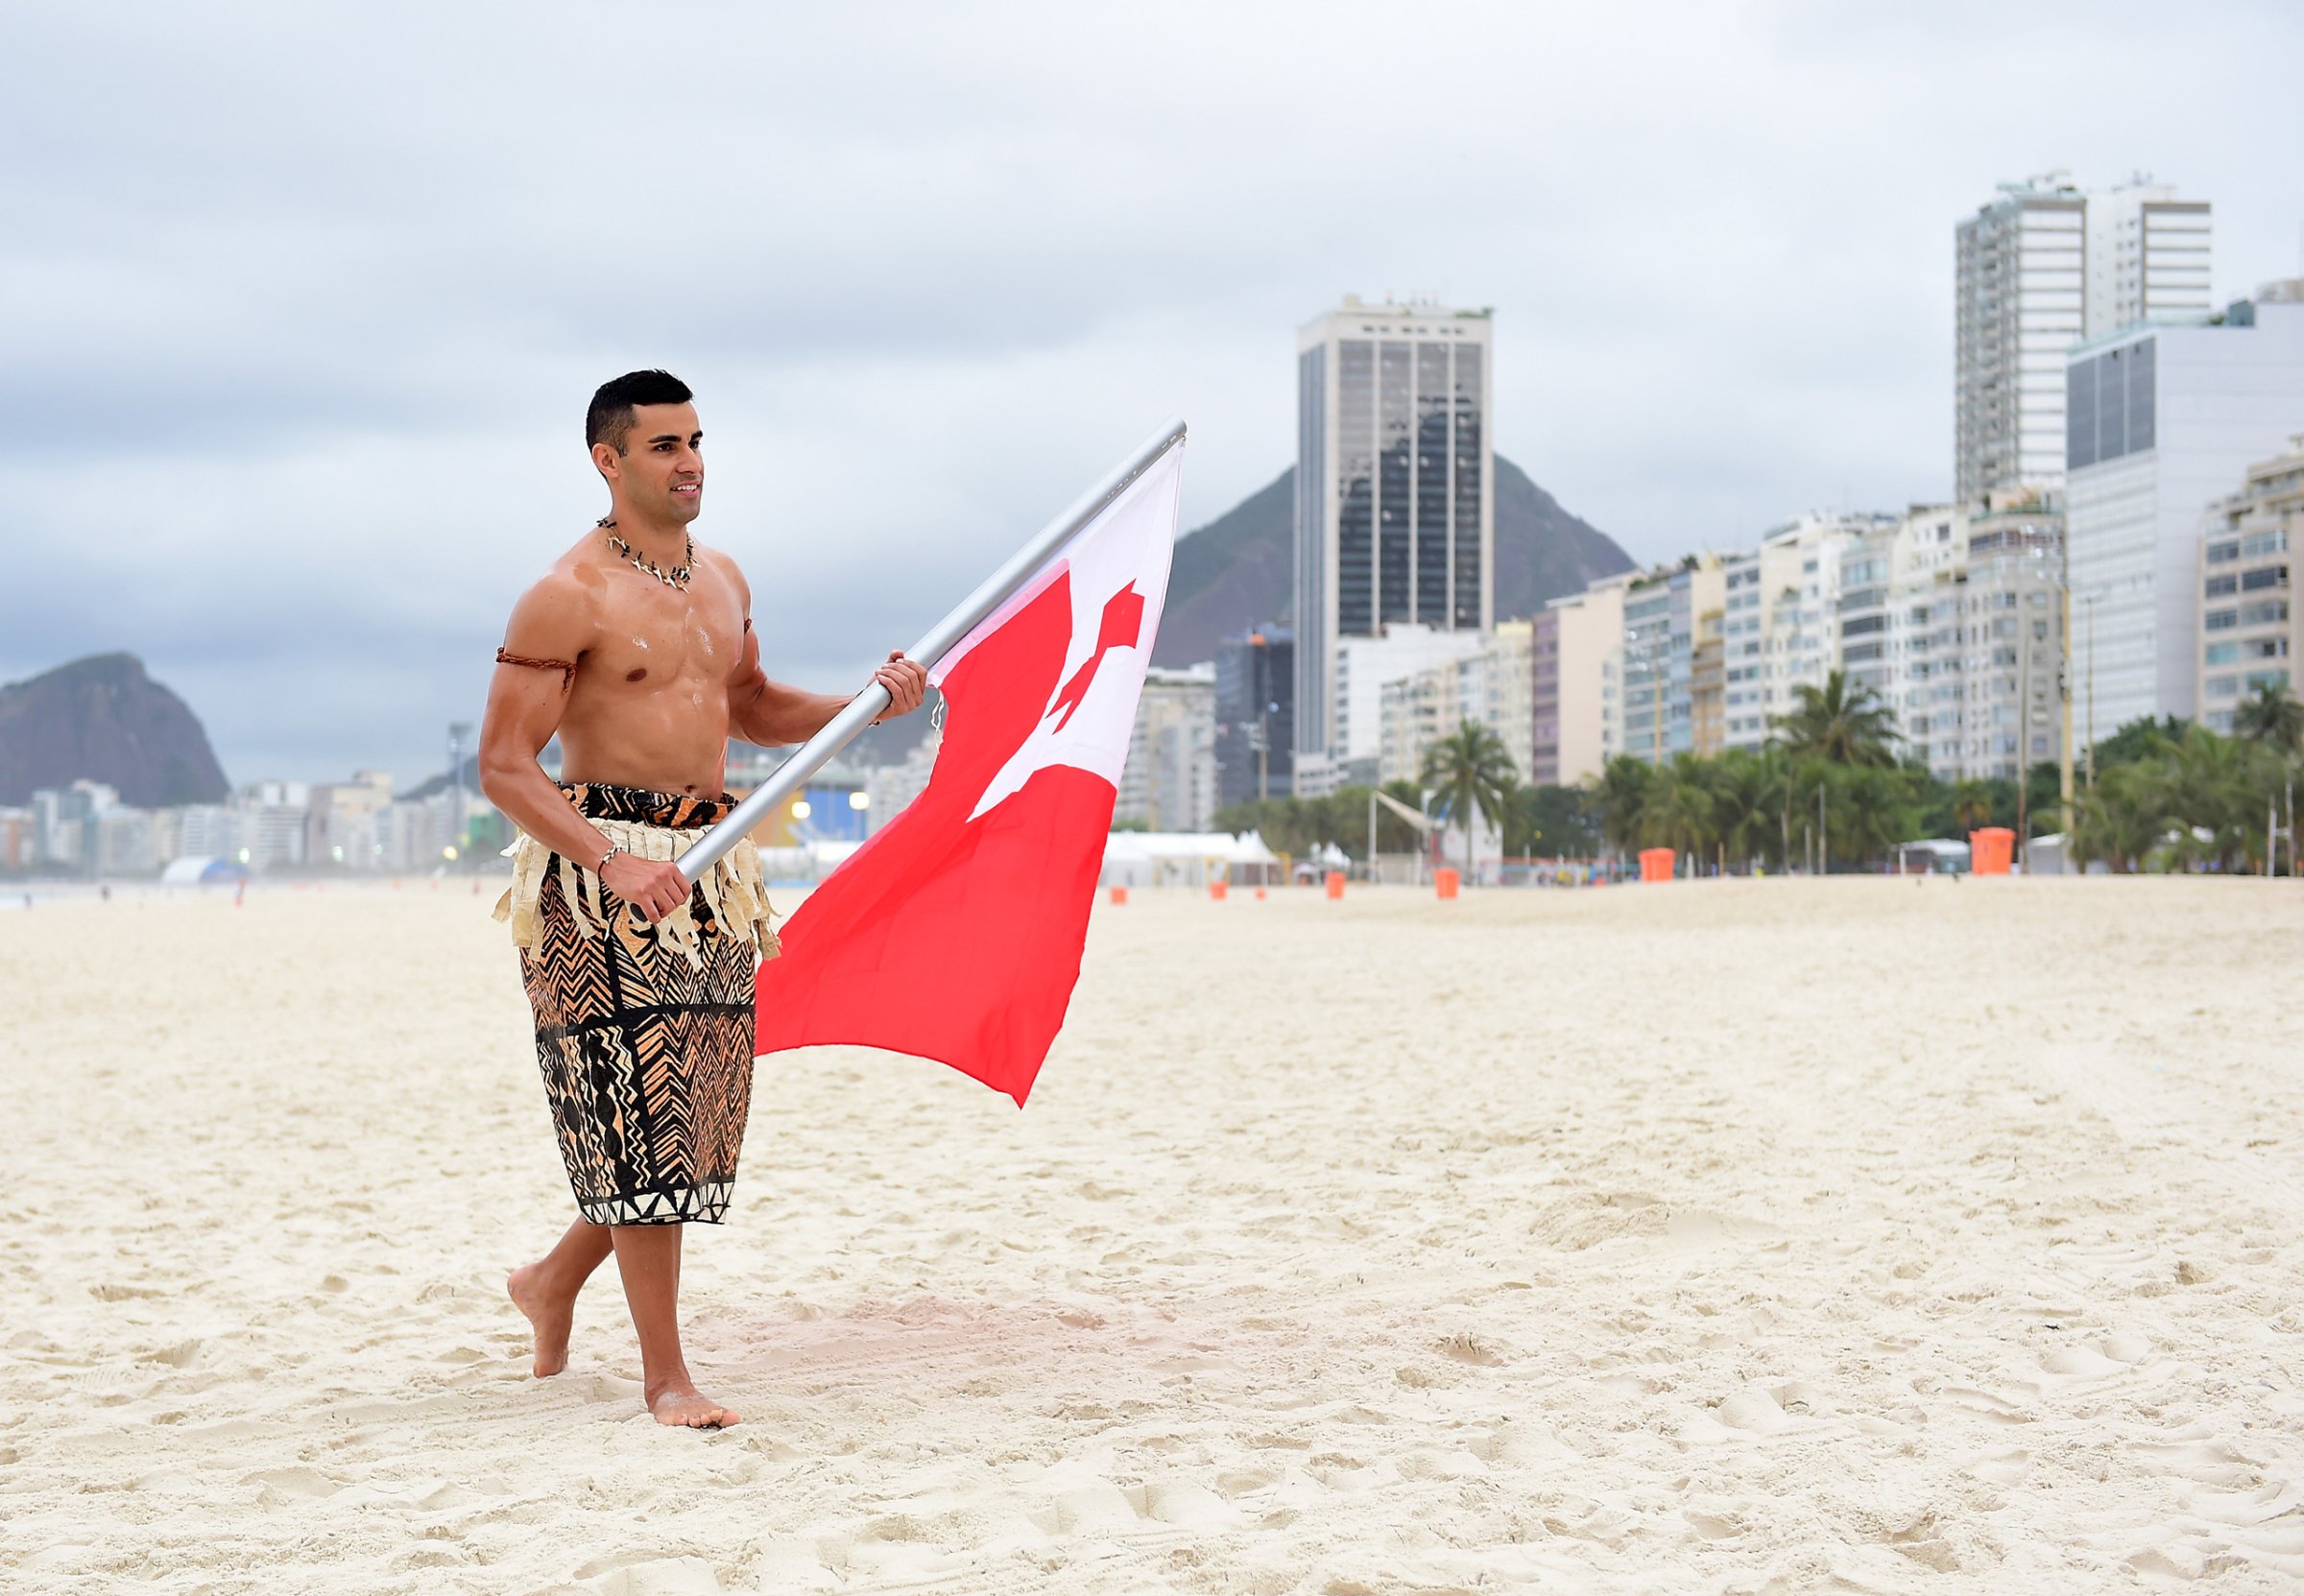 RIO DE JANEIRO, BRAZIL - AUGUST 08: Pita Taufatofua of Tonga walks along the sand with his country's flag to the NBC Today show set at Copacabana Beach on August 8, 2016 in Rio de Janeiro, Brazil. (Photo by Harry How/Getty Images)